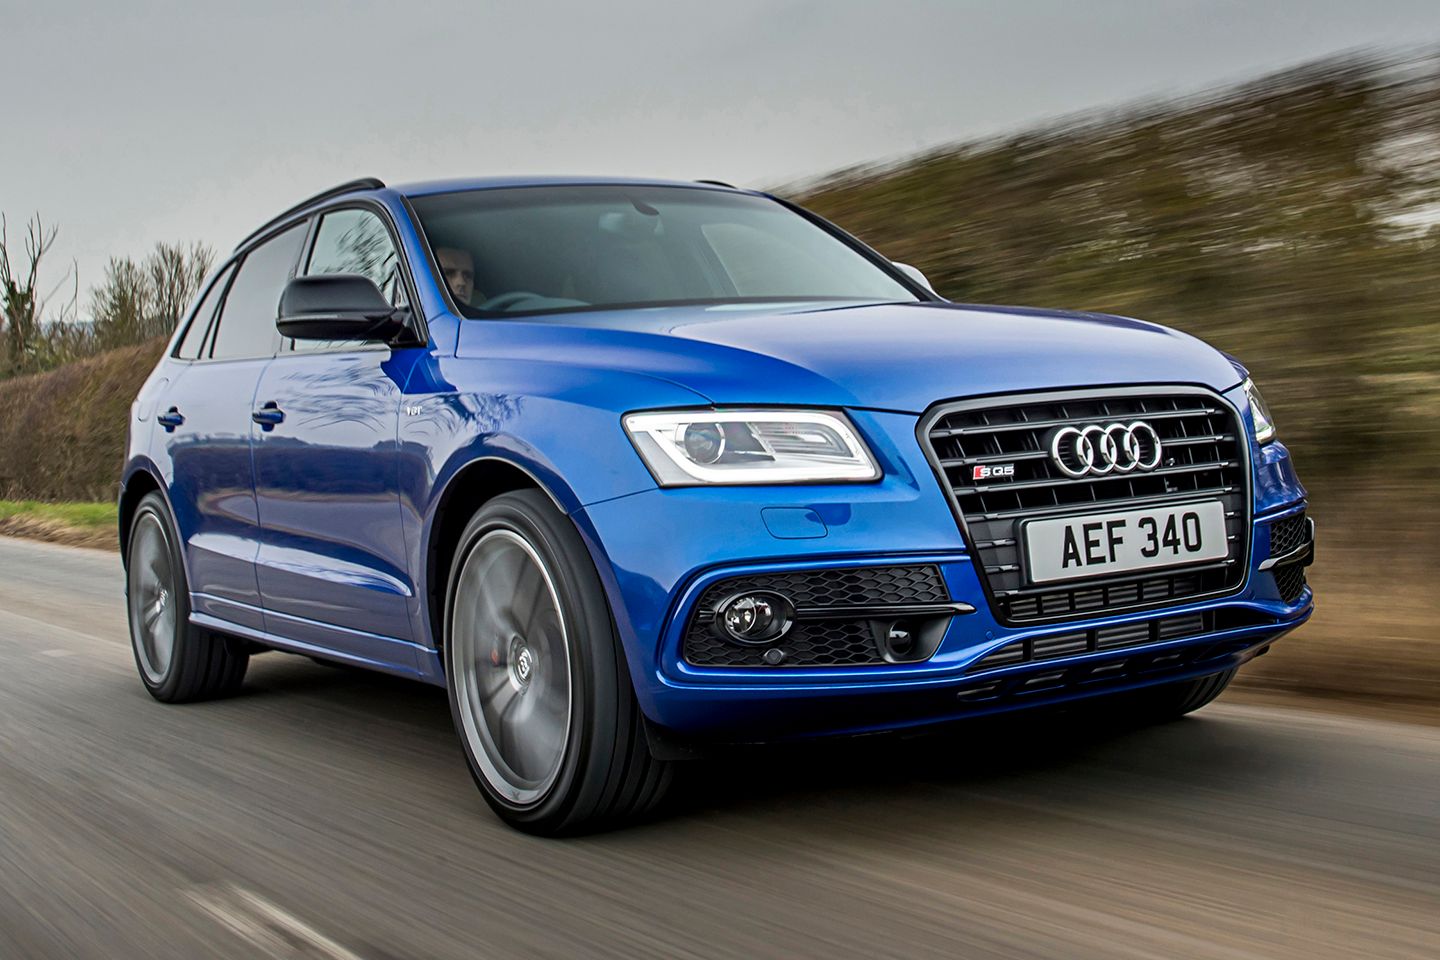 Audi SQ5 essentials: The best kind of compromise